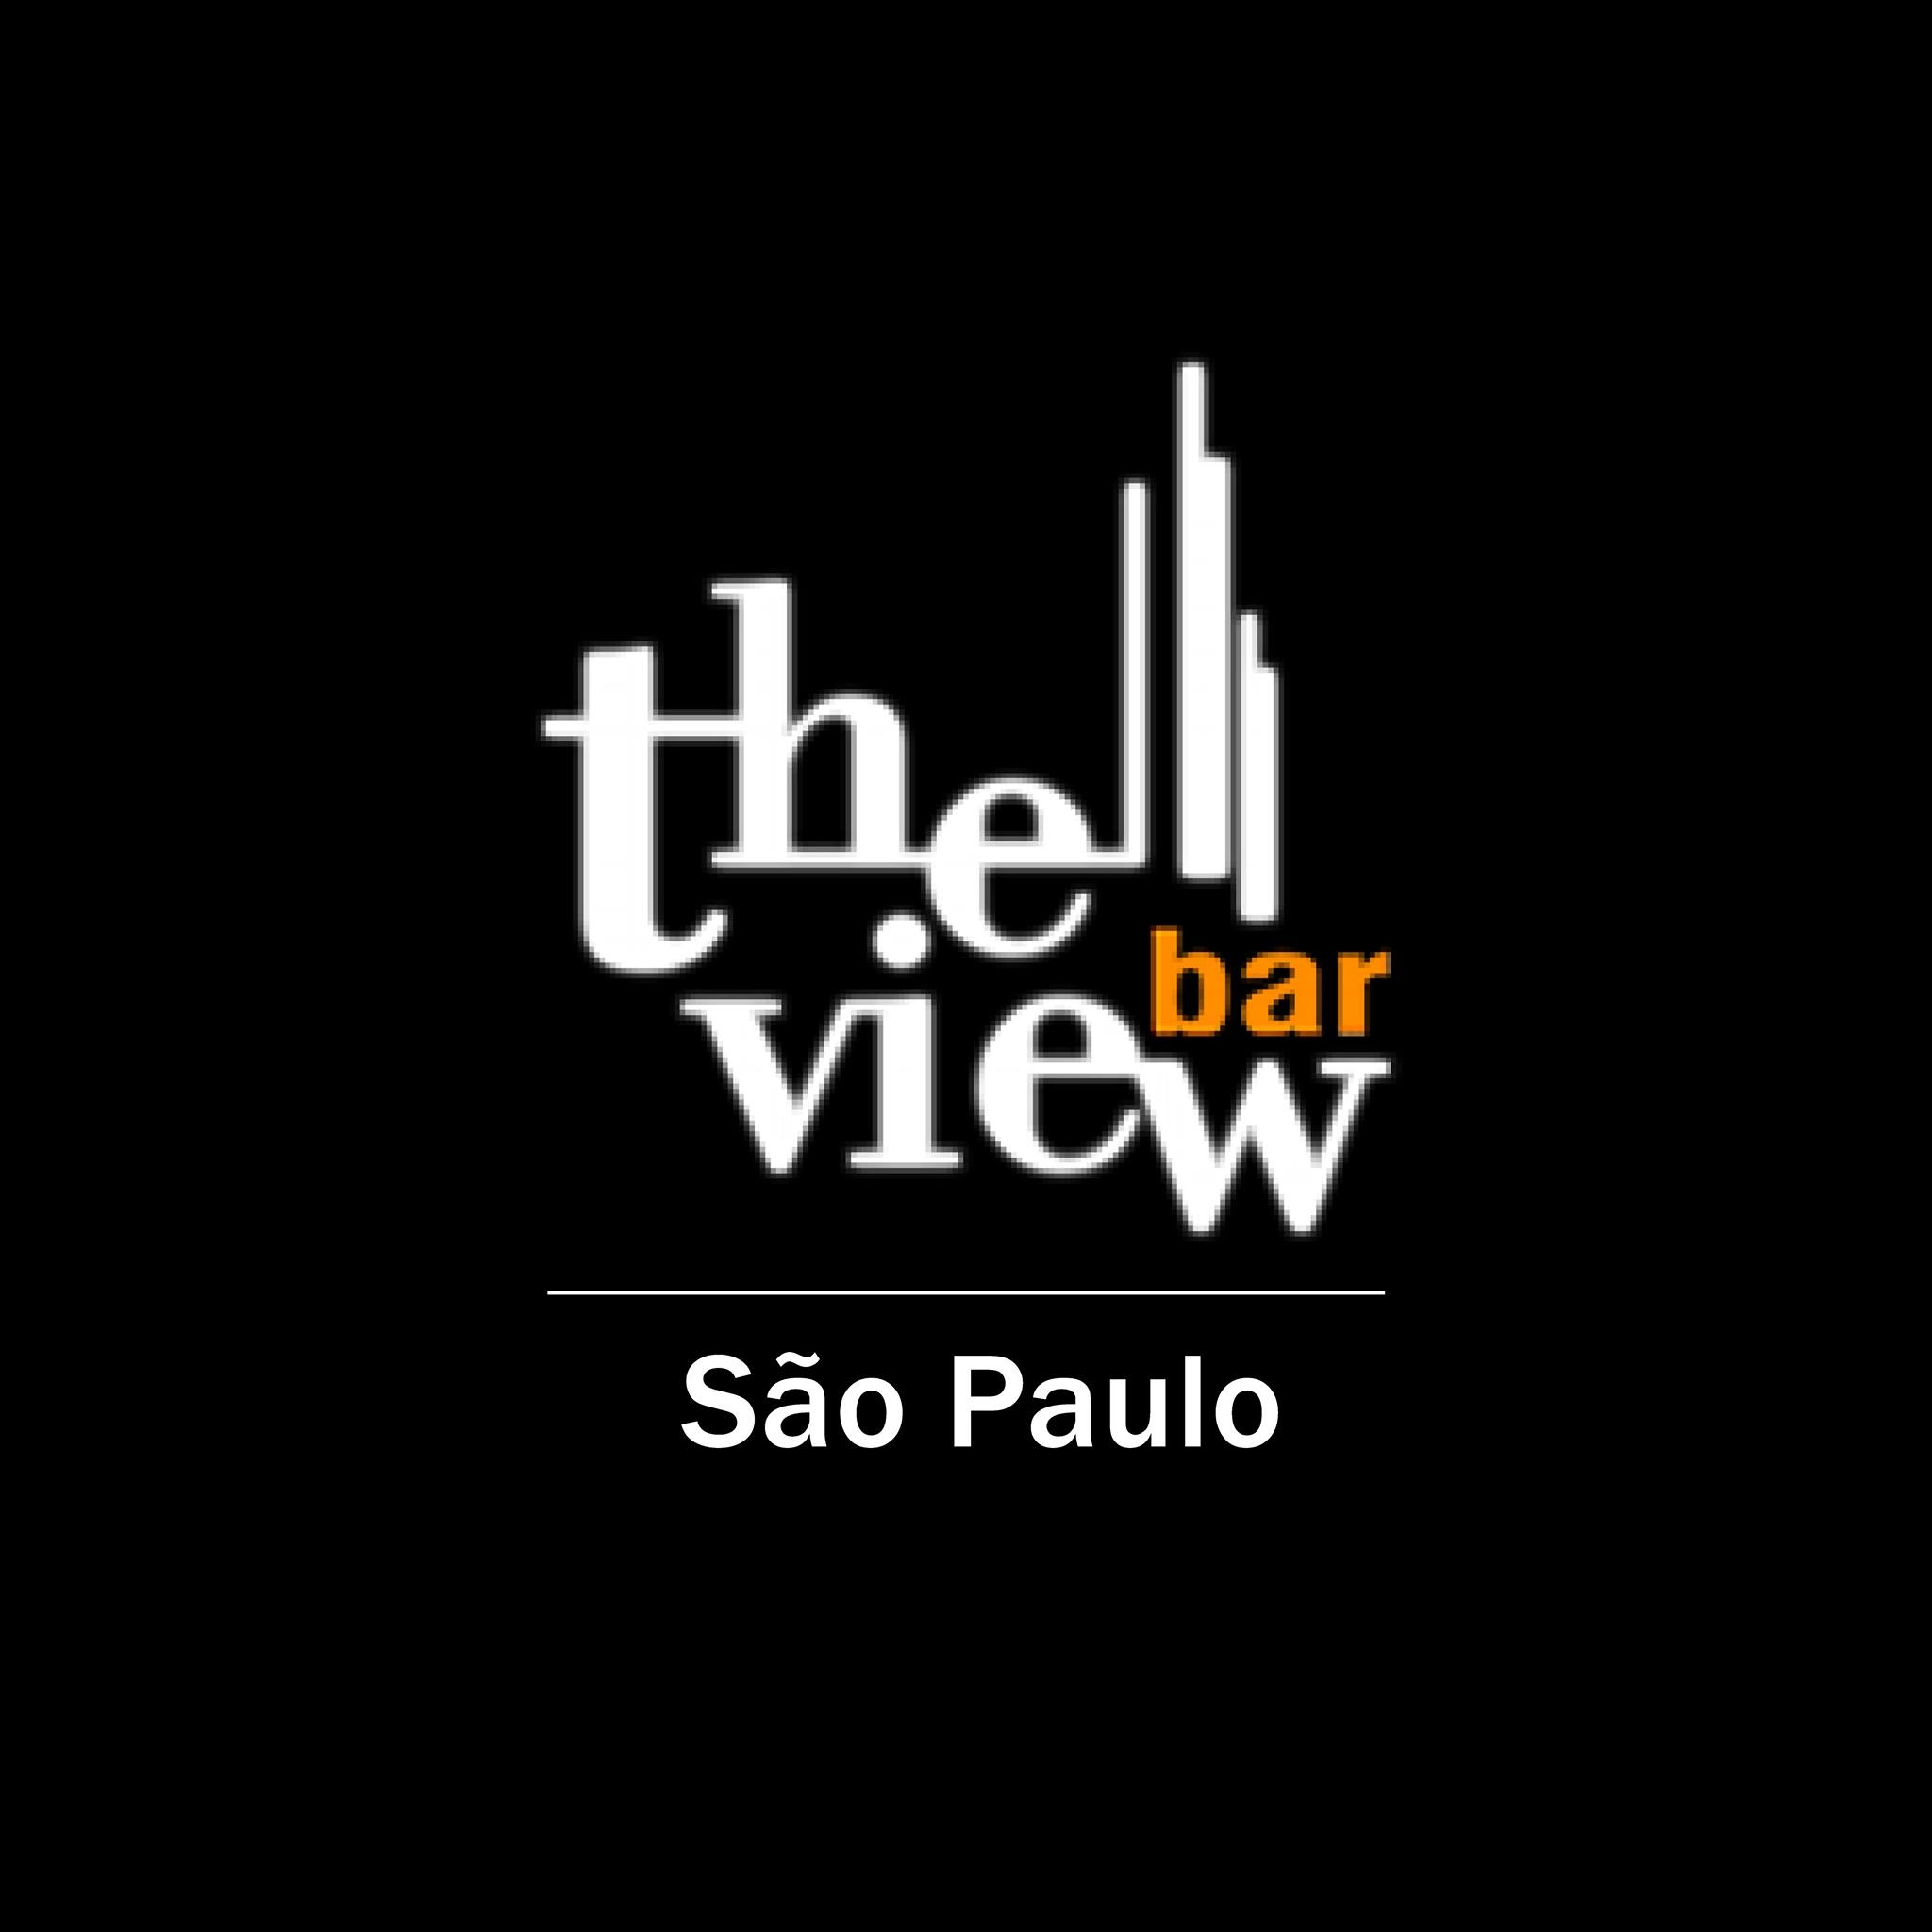 THE VIEW BAR 